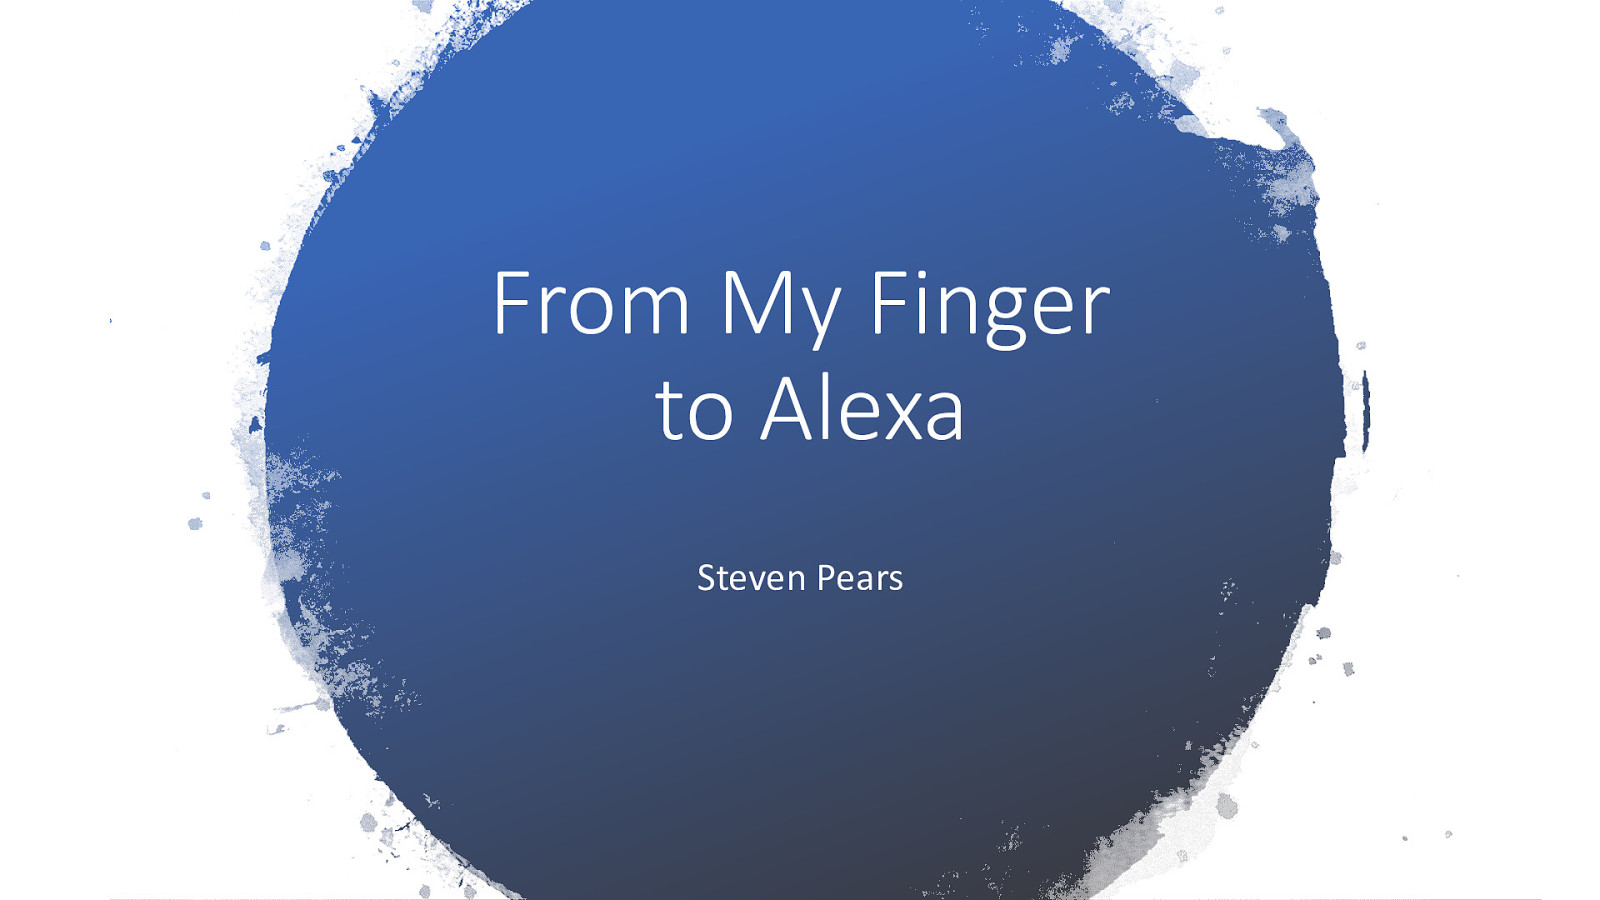 From My Finger to Alexa